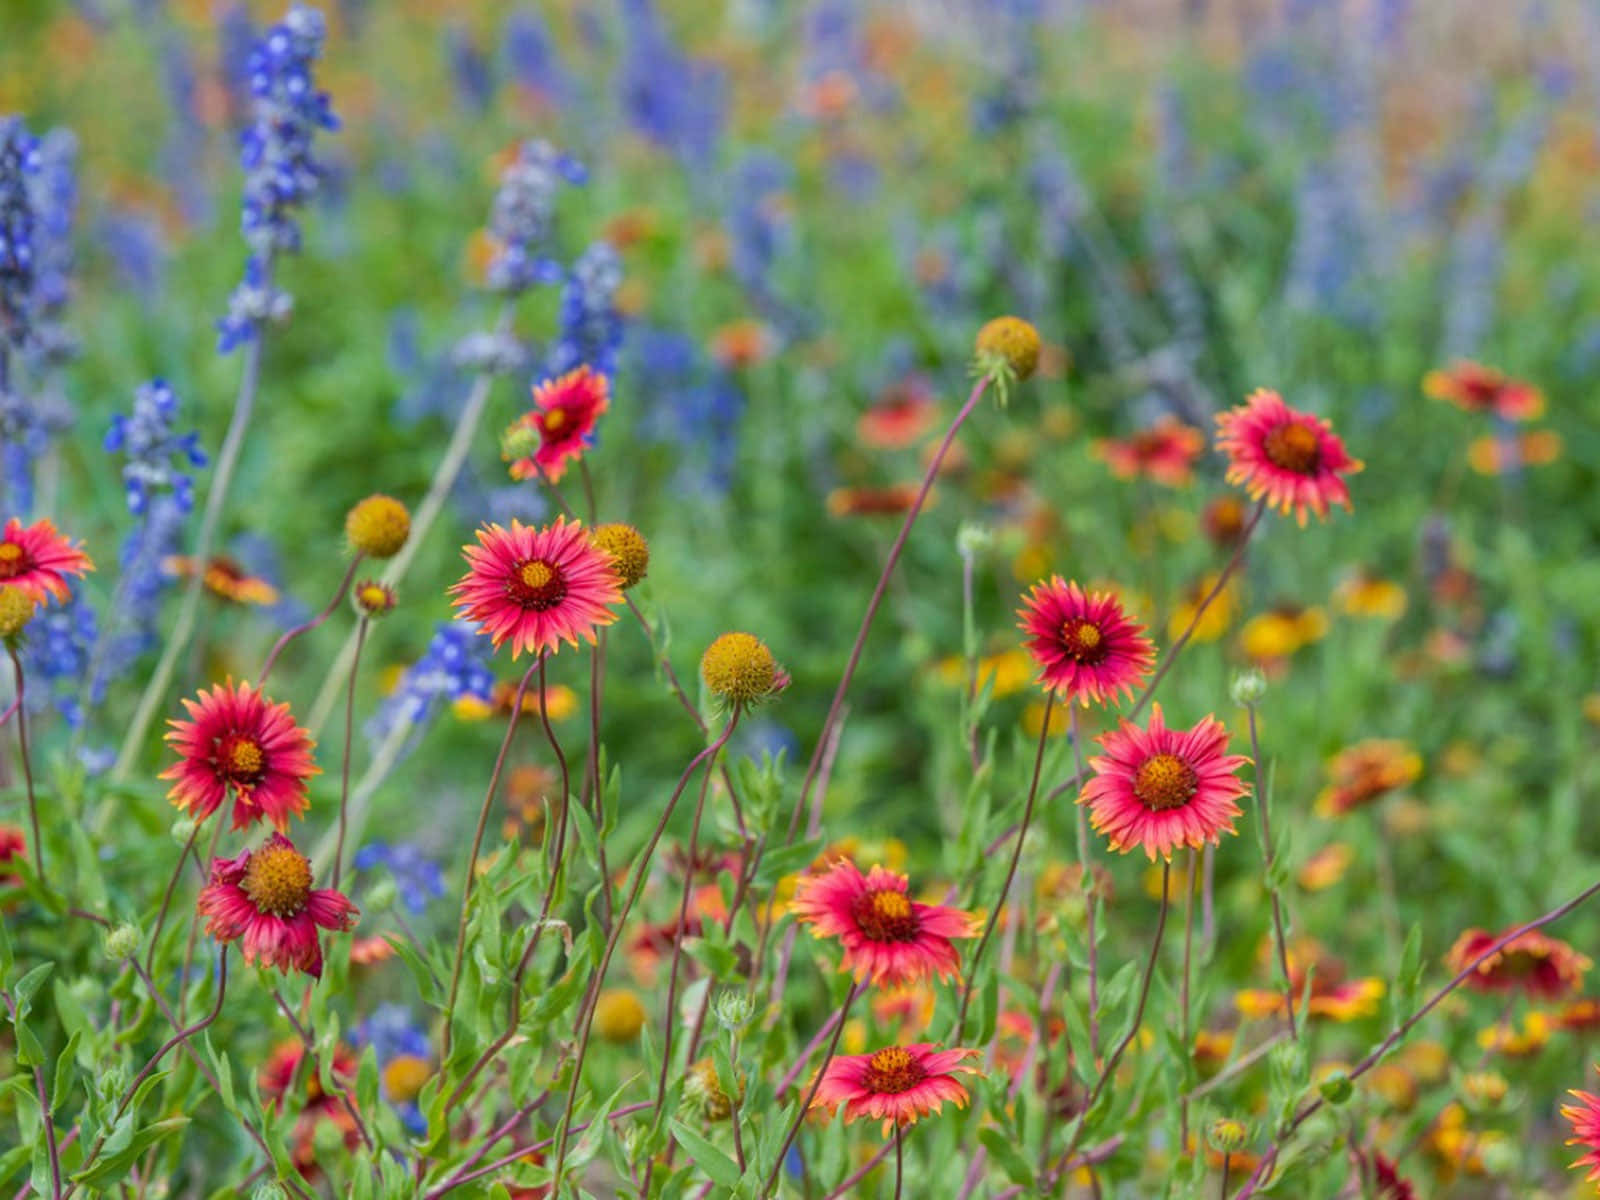 Vibrant Wildflowers in a Lush Meadow Wallpaper